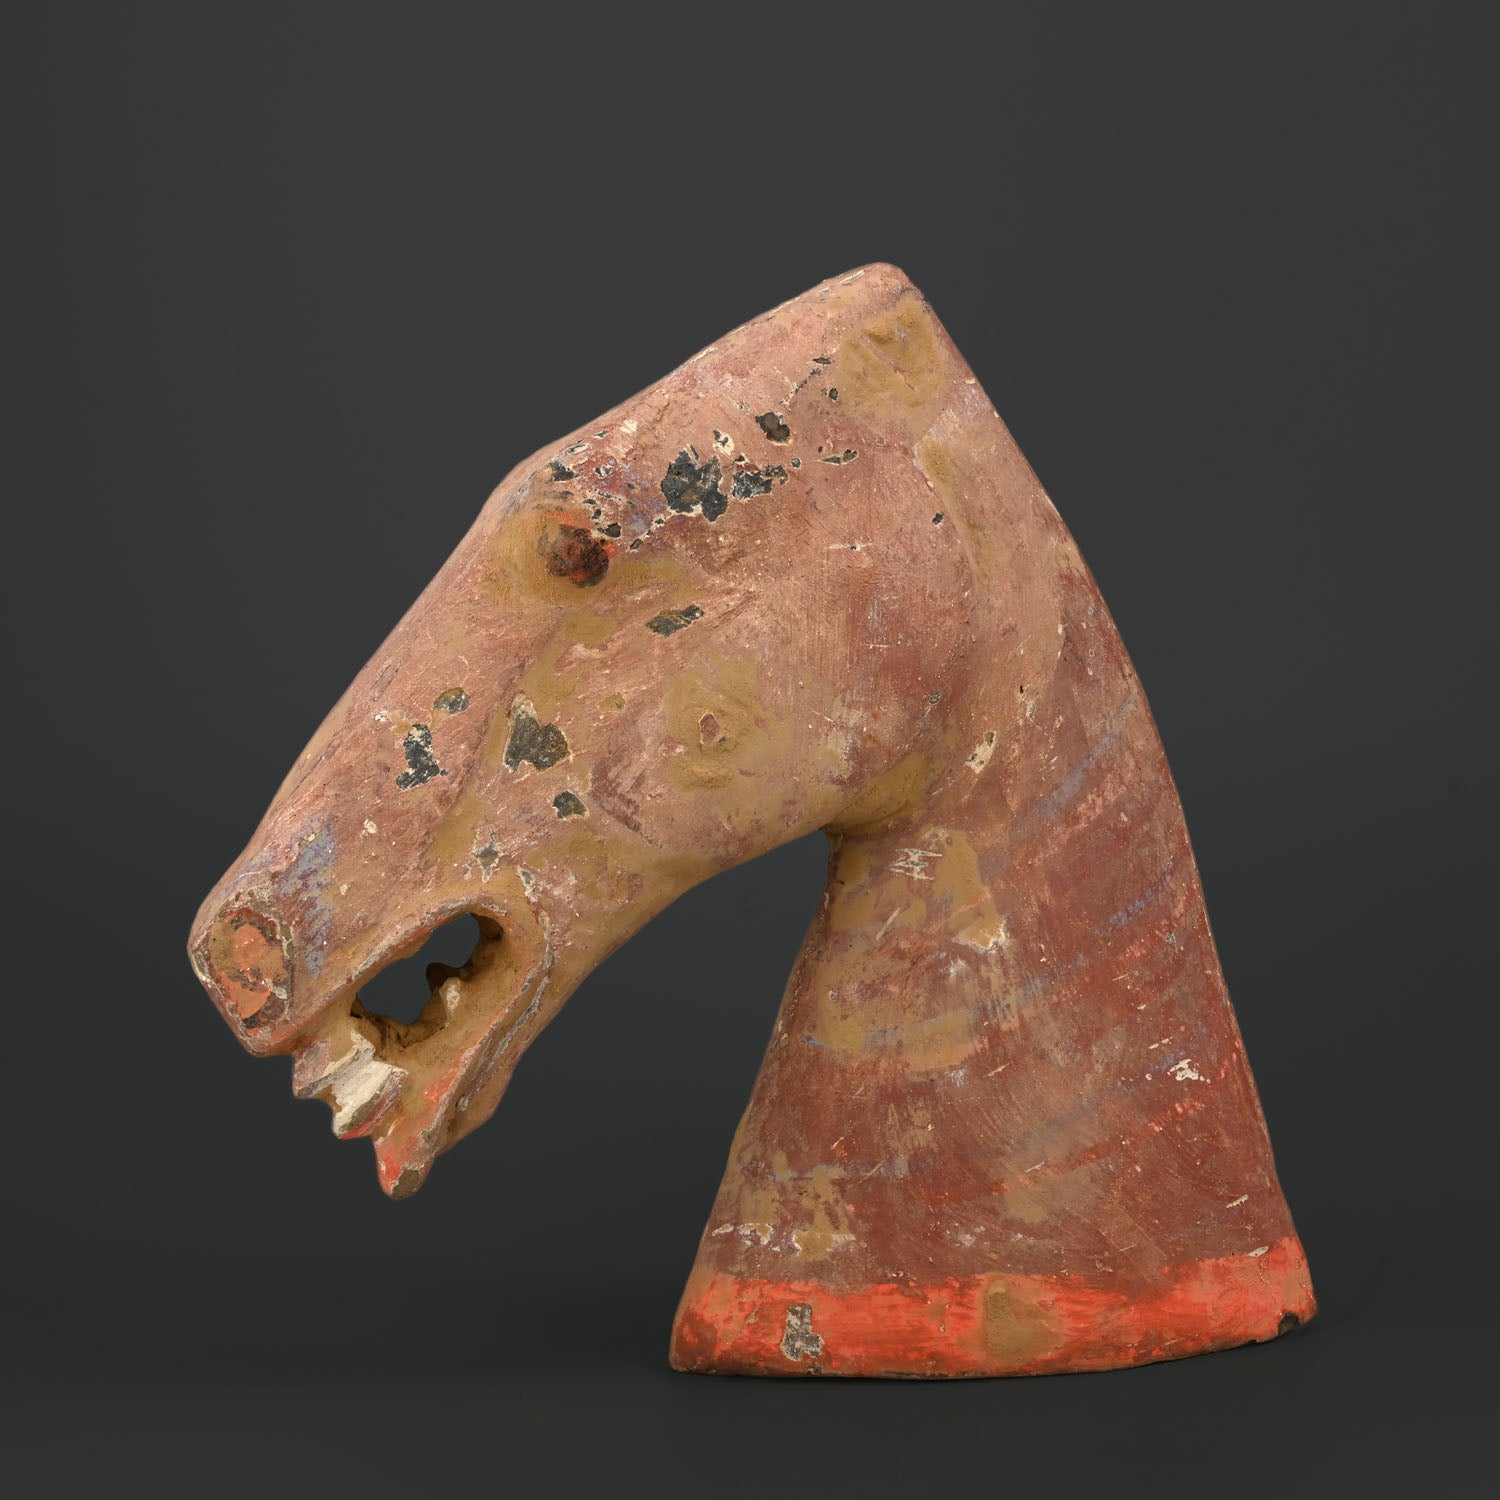 A Chinese Terracotta Head of a Horse, Han Dynasty, ca. 25 - 220 CE